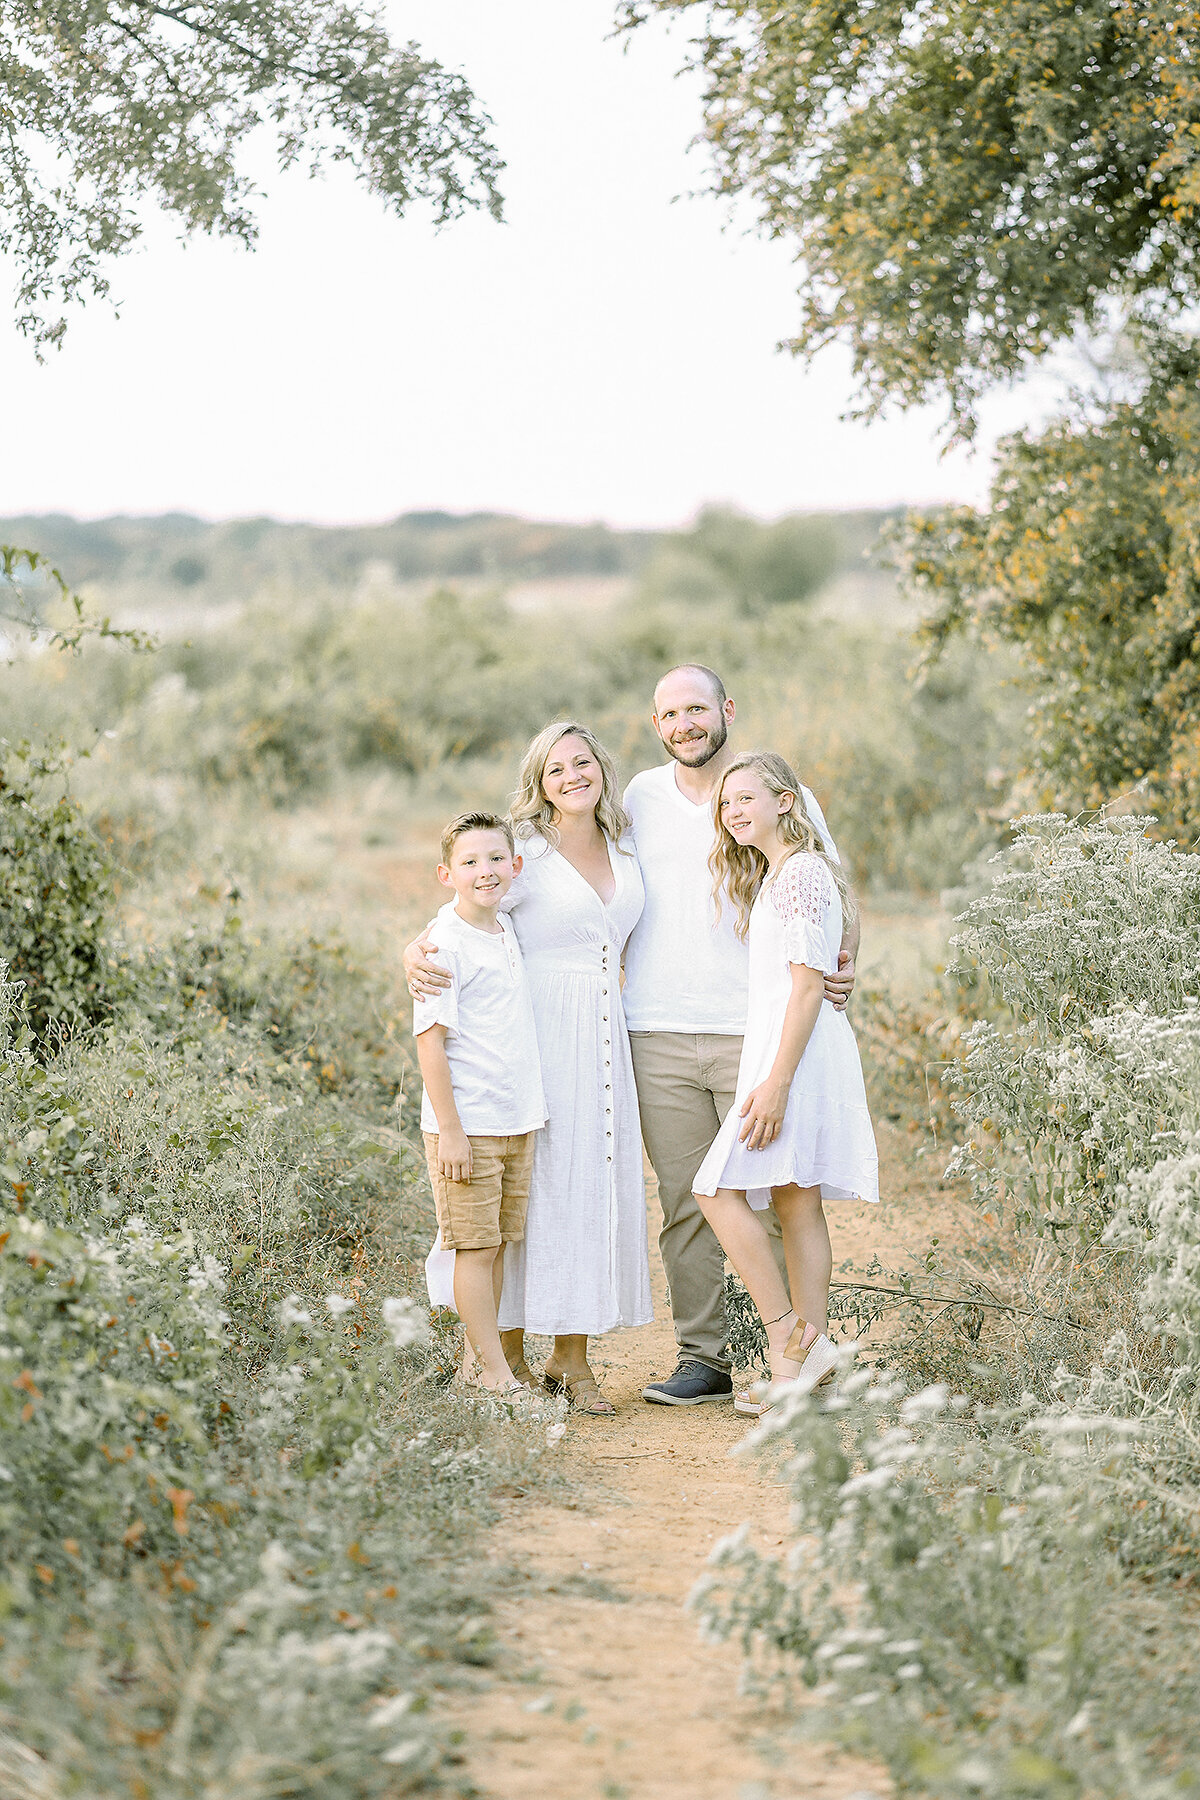 A family photo taken while they are standing together holding hands in the middle of a path by a beautiful field at a local Dallas Fort Worth park captured by their favorite Dallas Family Photographer.